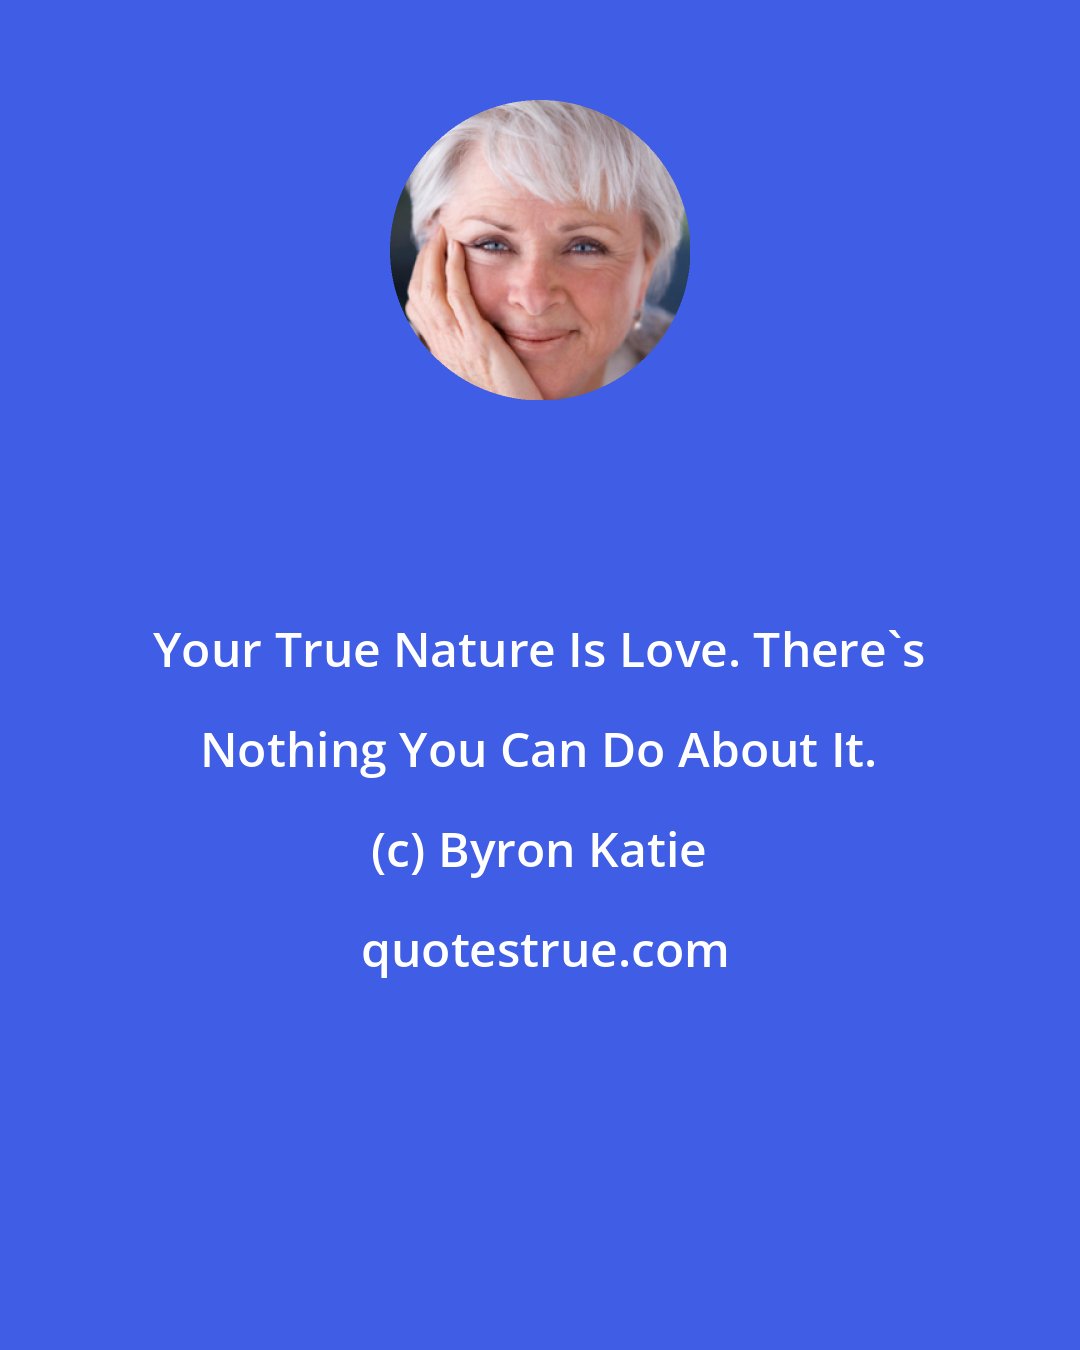 Byron Katie: Your True Nature Is Love. There's Nothing You Can Do About It.